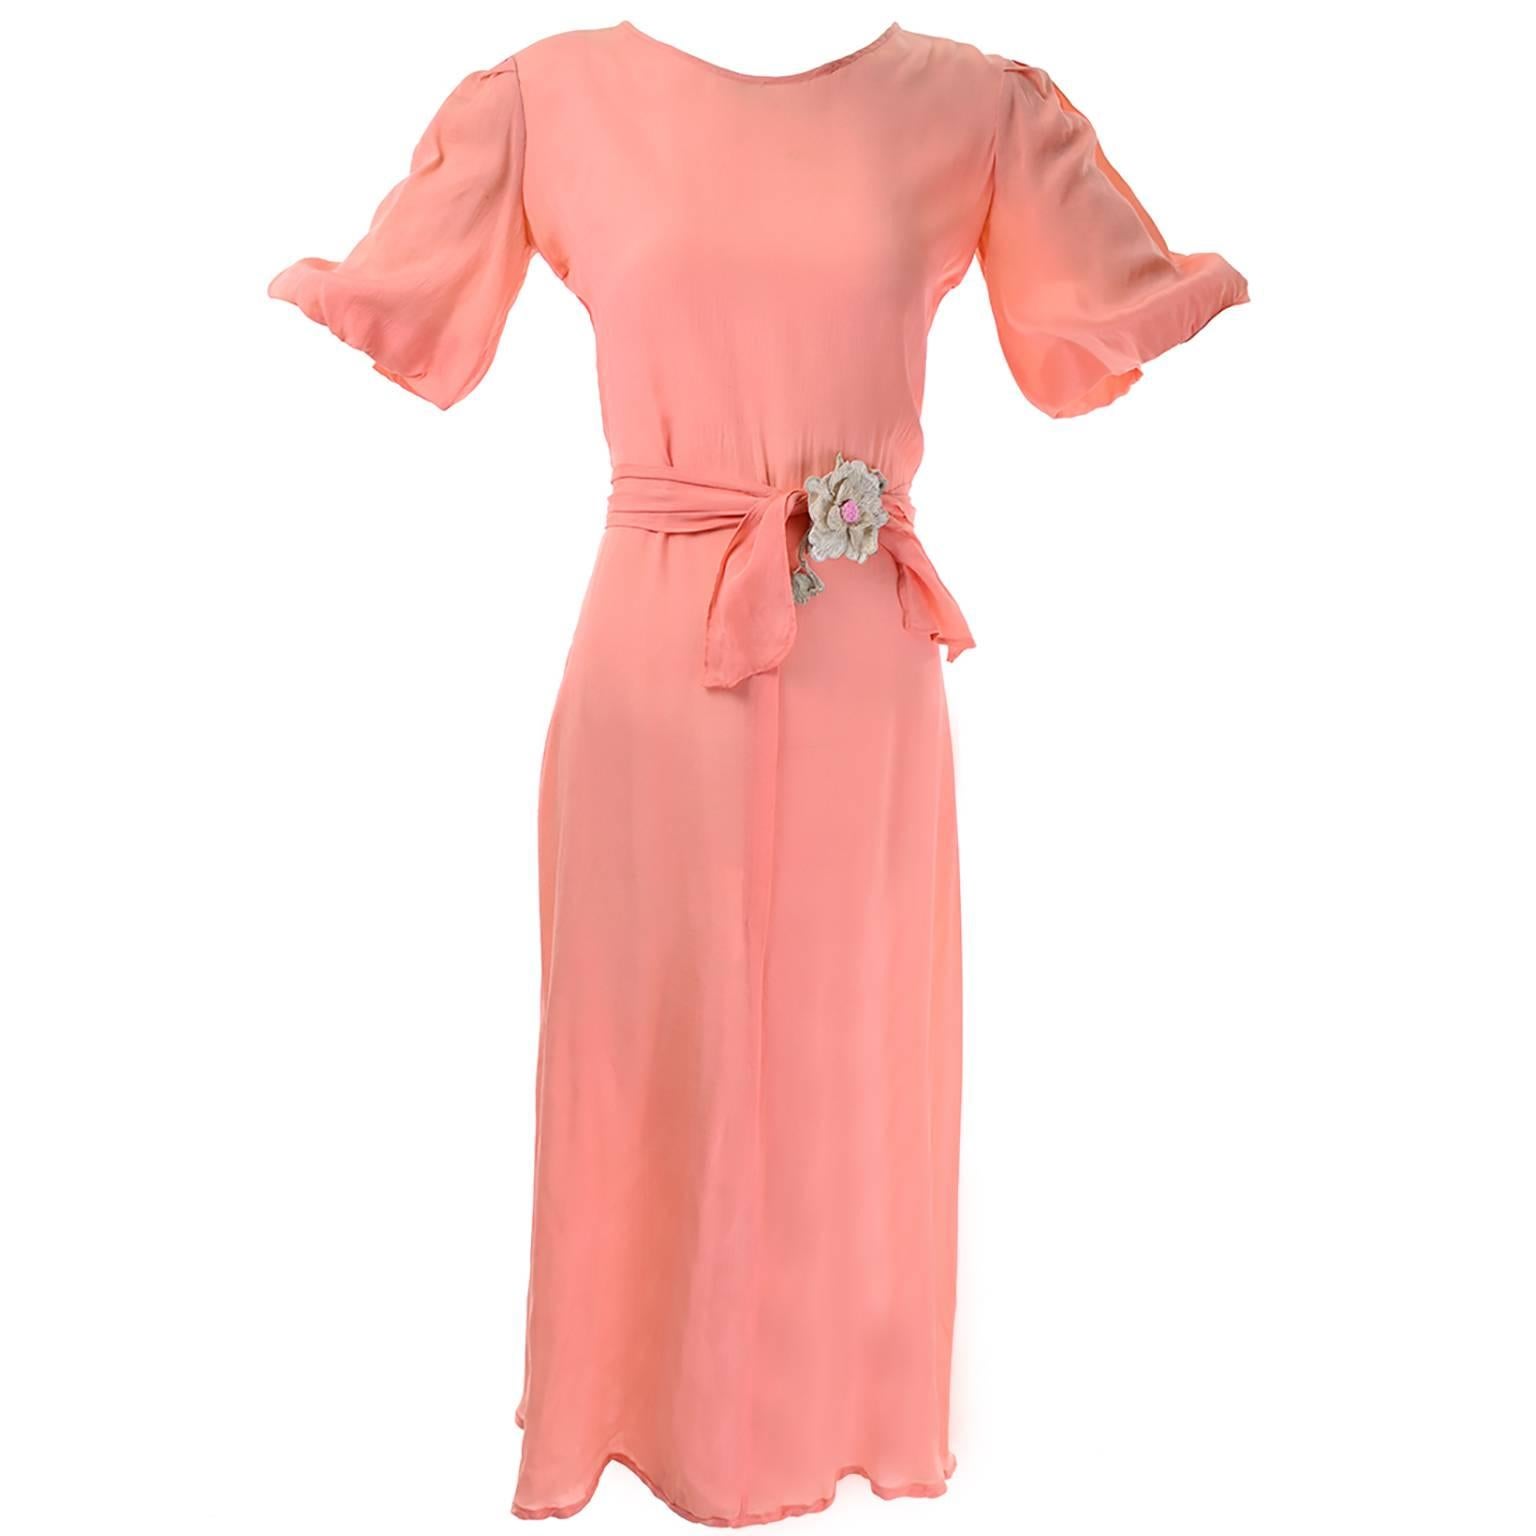 This is a pretty vintage peach silk dress from the 1930's with a matching peach waist tie. The belt has a flower applique and the puff sleeves are gathered around the arm and lined with netting. We estimate this to be a modern day size 6/8 but